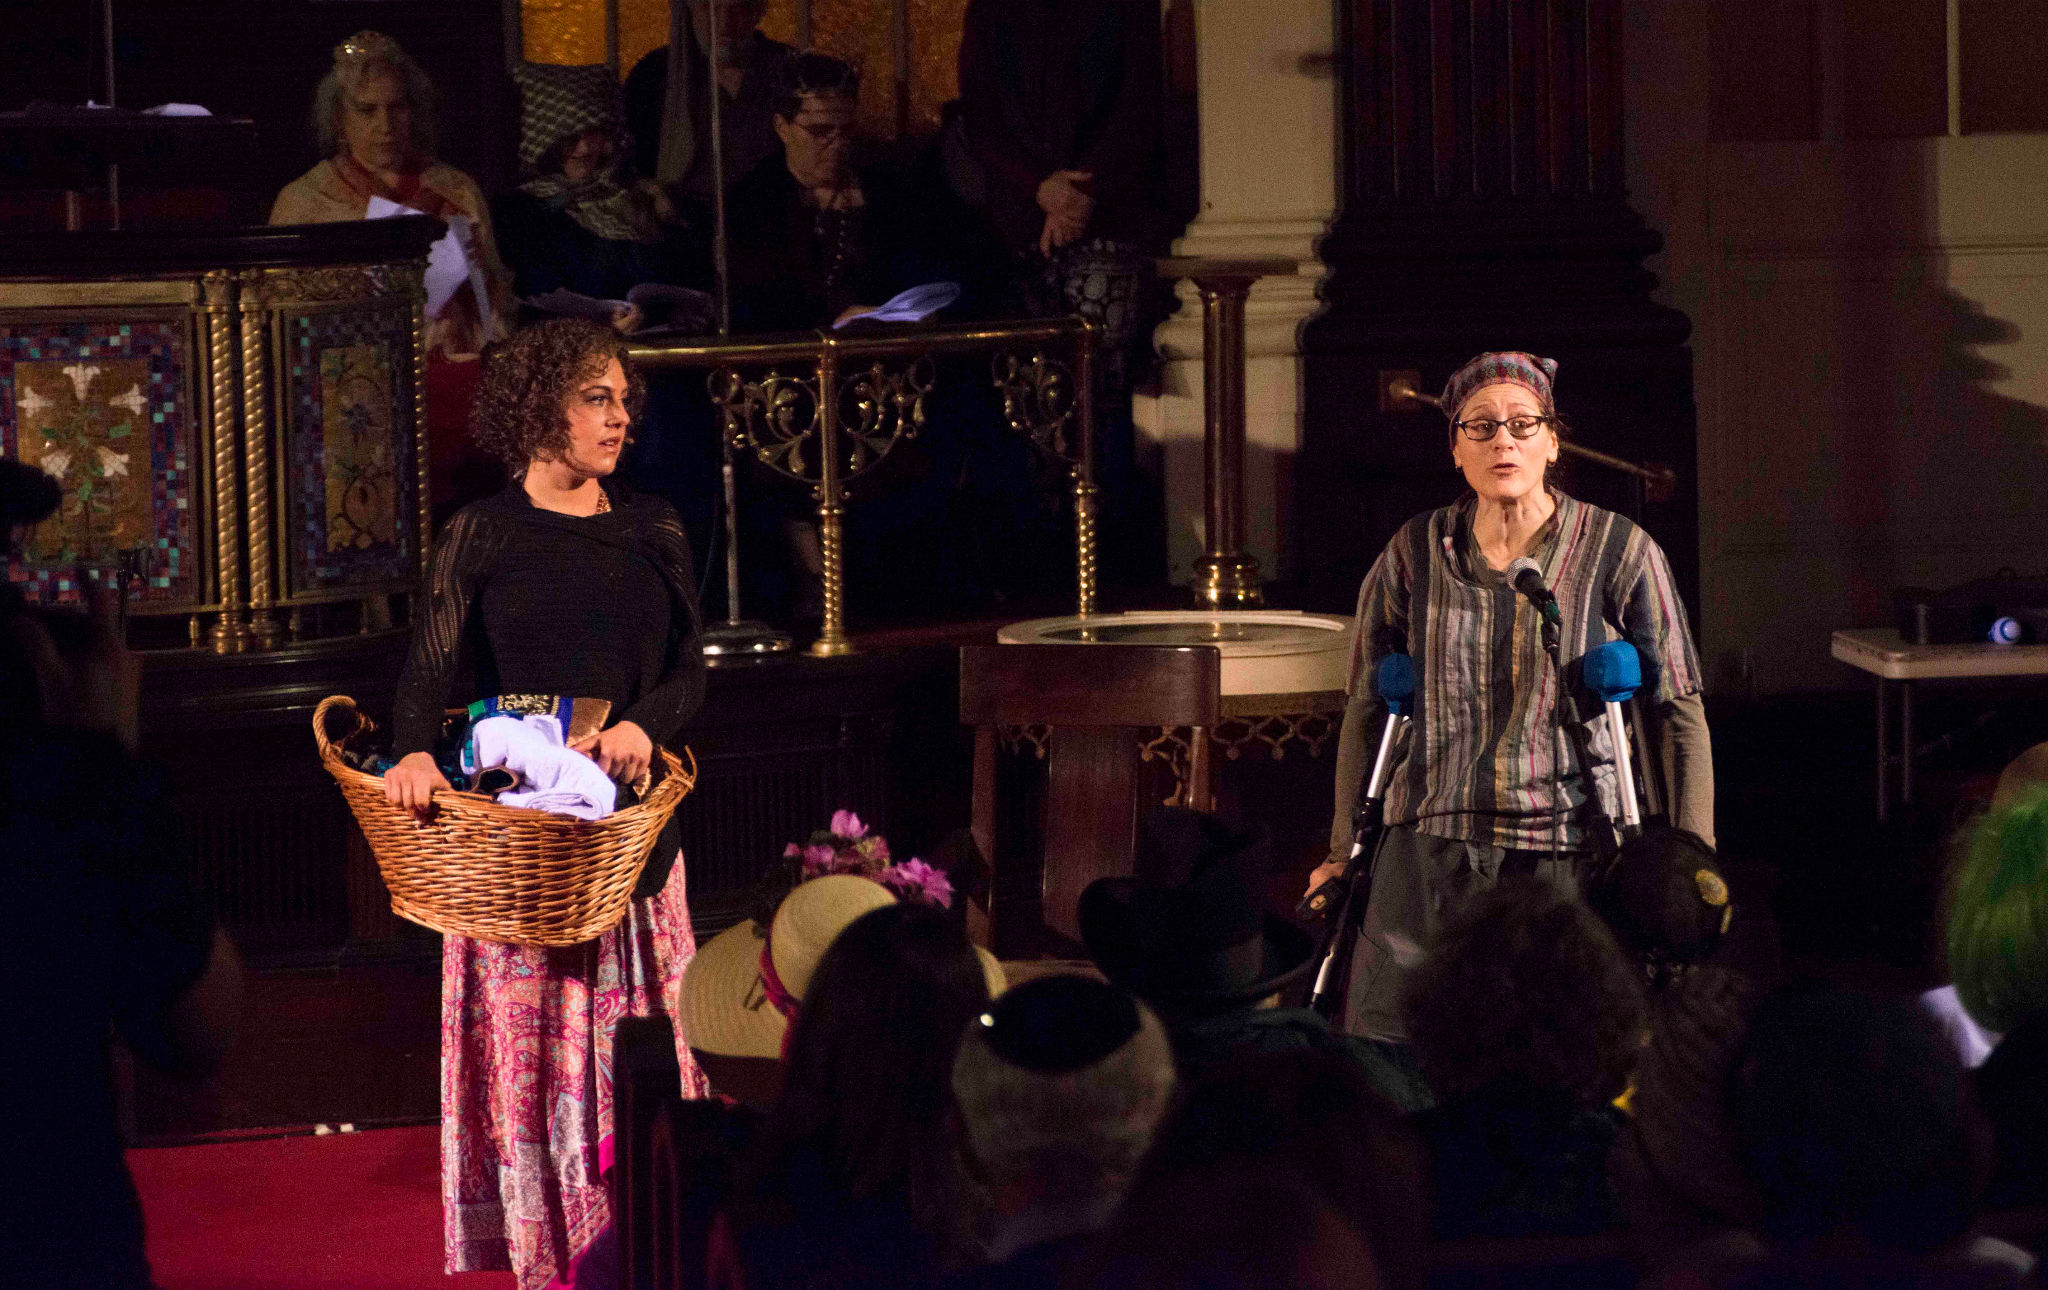 A woman with a laundry basket and a woman on crutches stand on opposite sides of the stage.